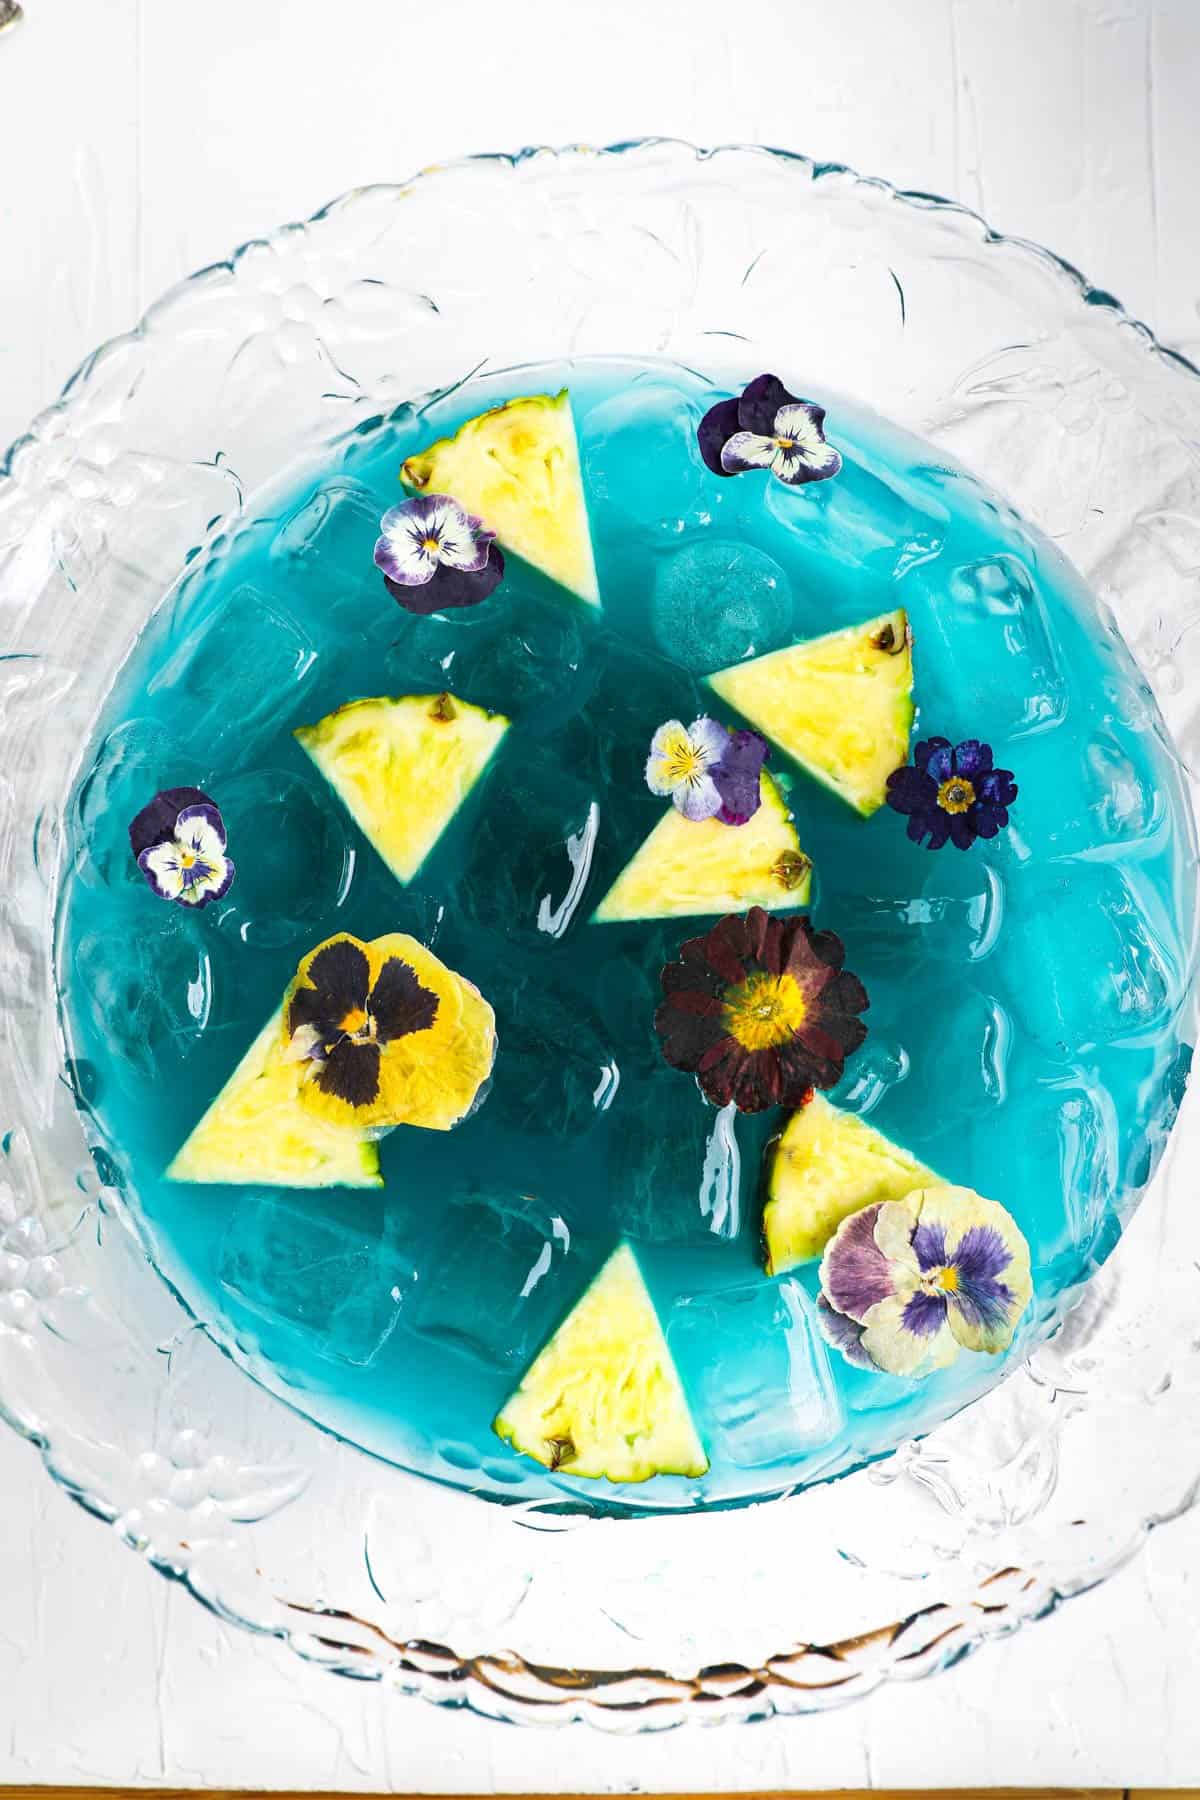 Blue alcoholic baby shower punch in bowl with pineapple chunks and flowers.